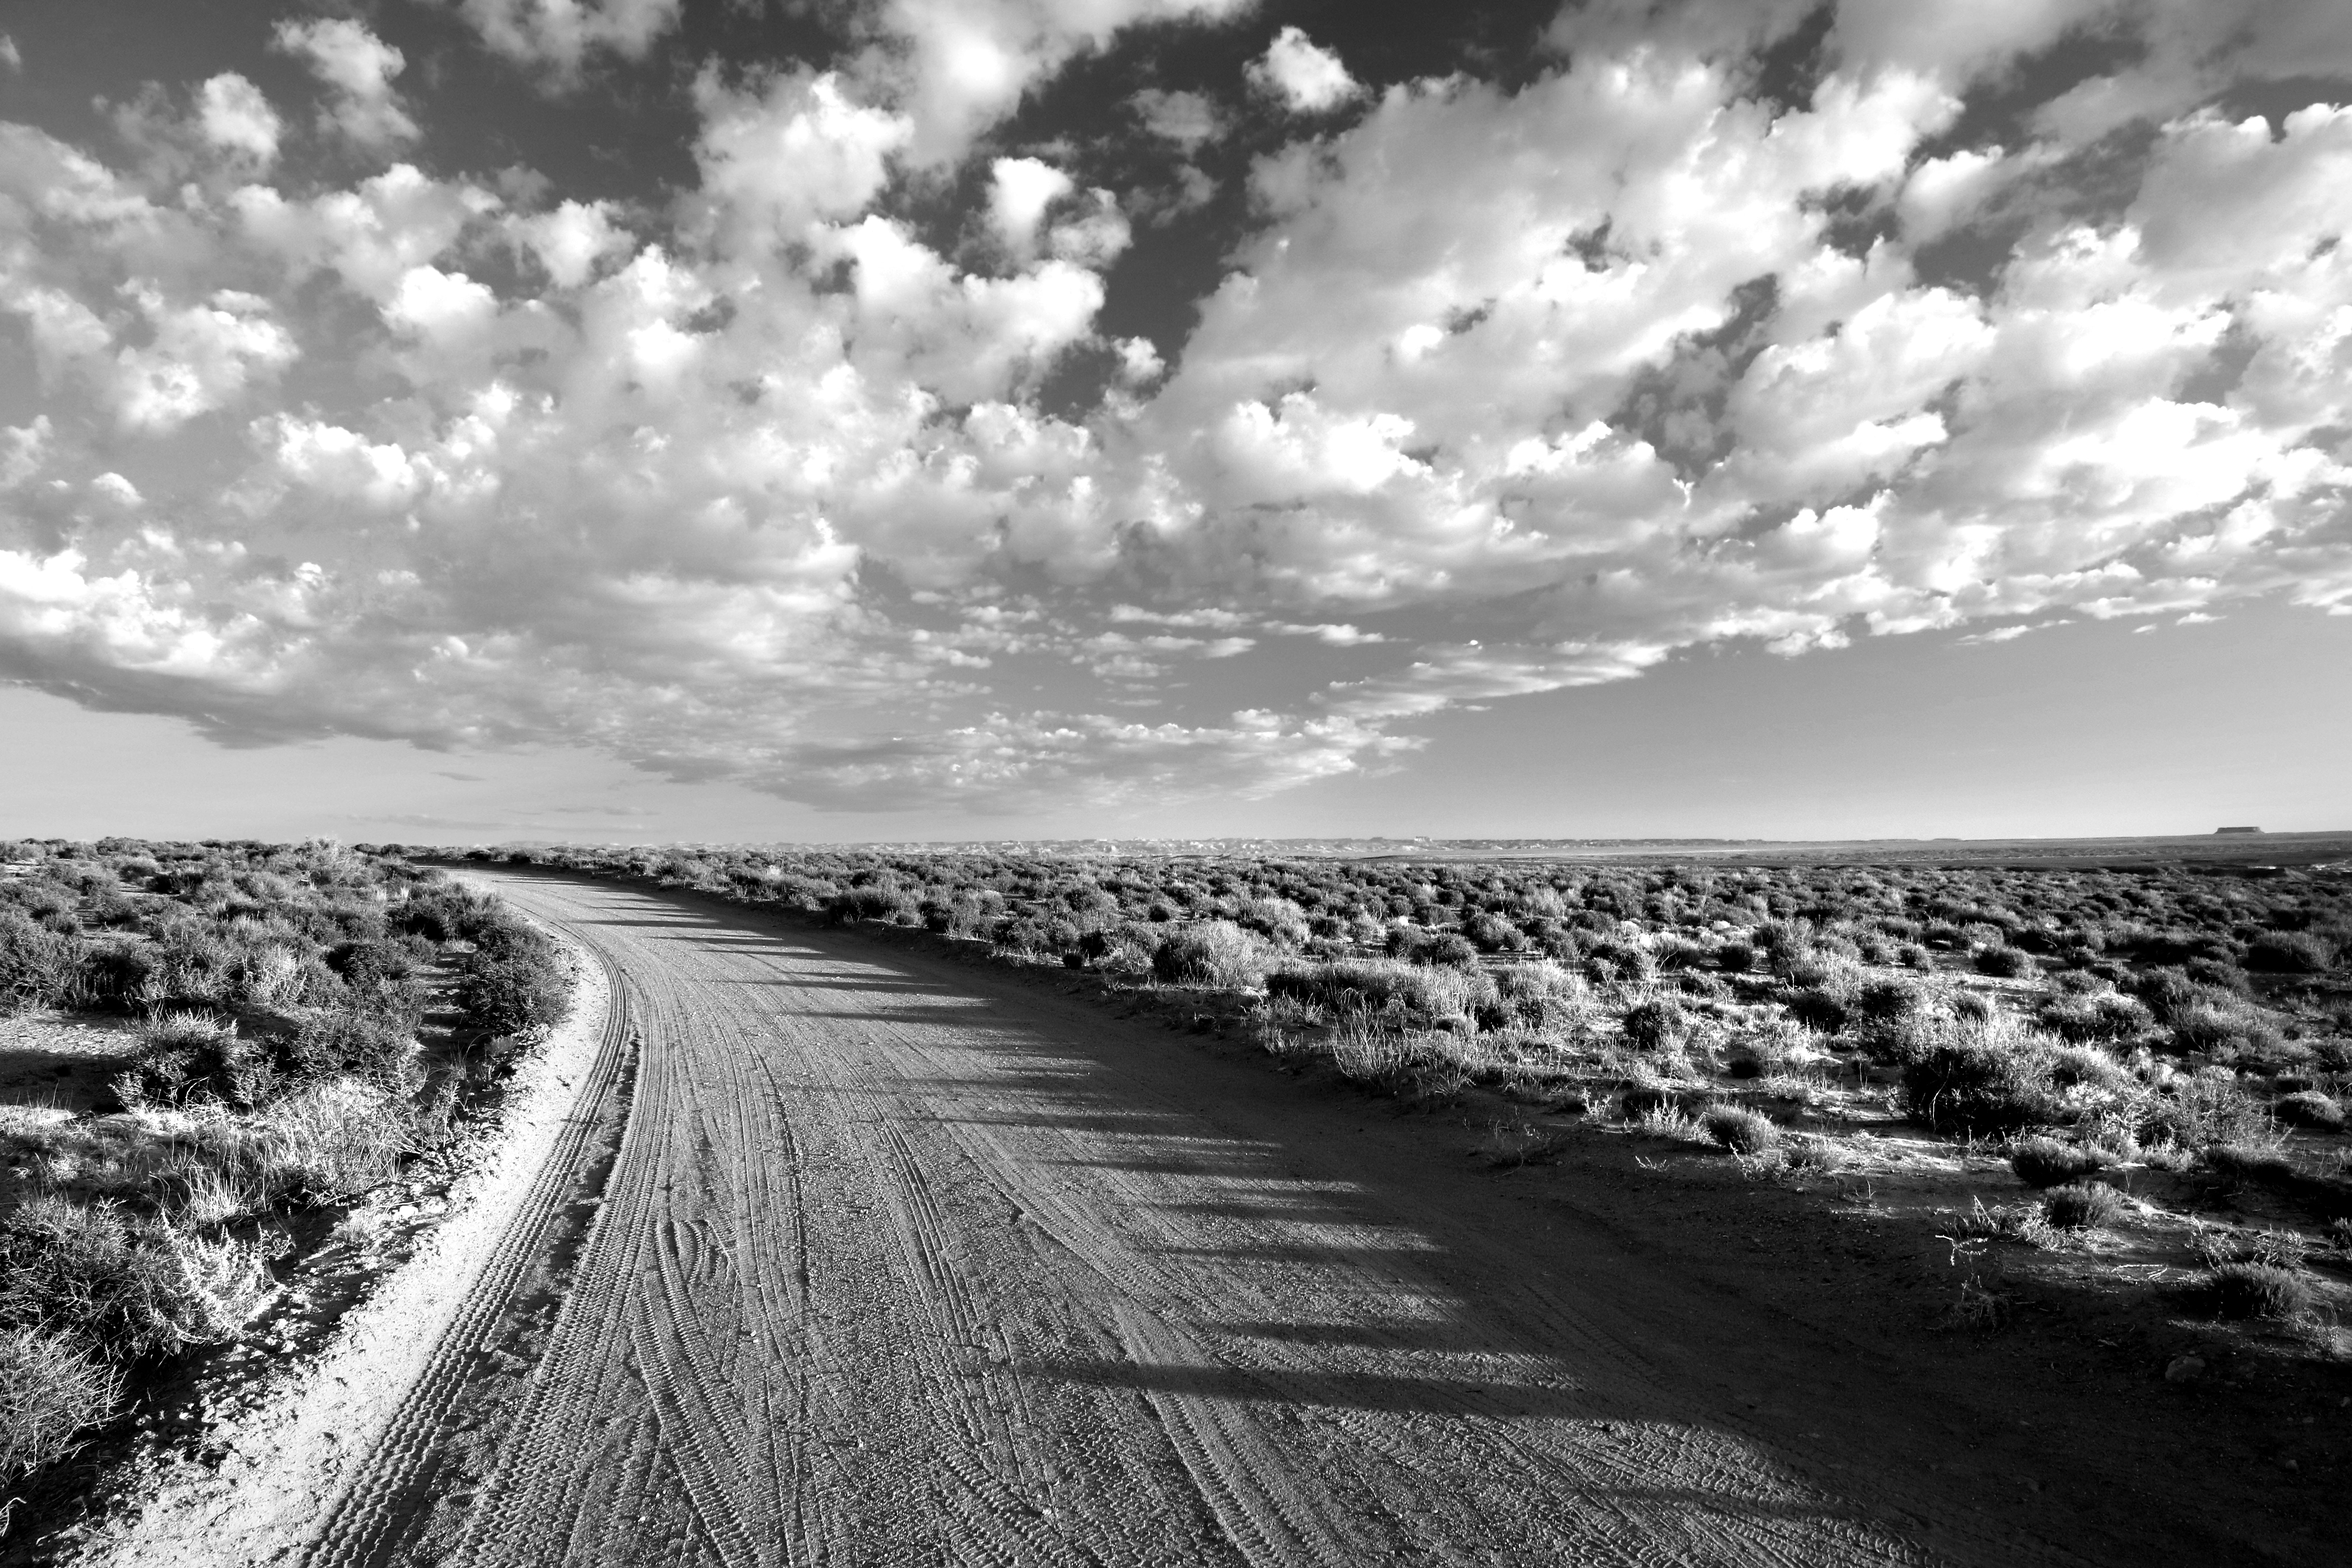 Grayscale Photo of Empty Road Between Grass Field Under Cloudy Sky, Arid, Barren, Black-and-white, Clouds, HQ Photo